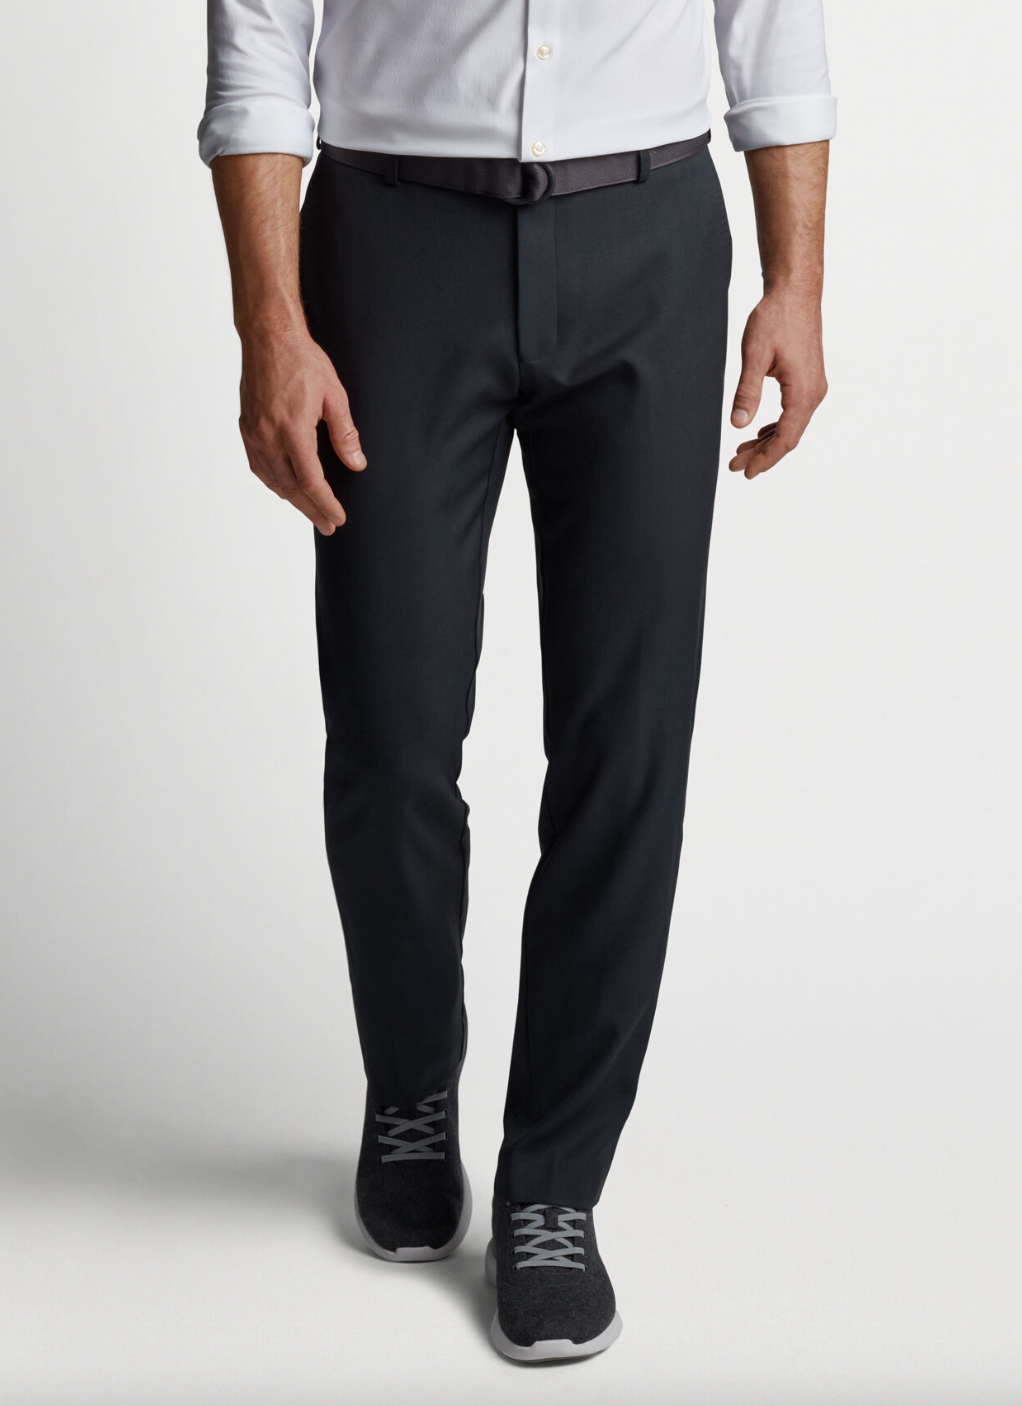 Franklin Performance Trouser Charcoal